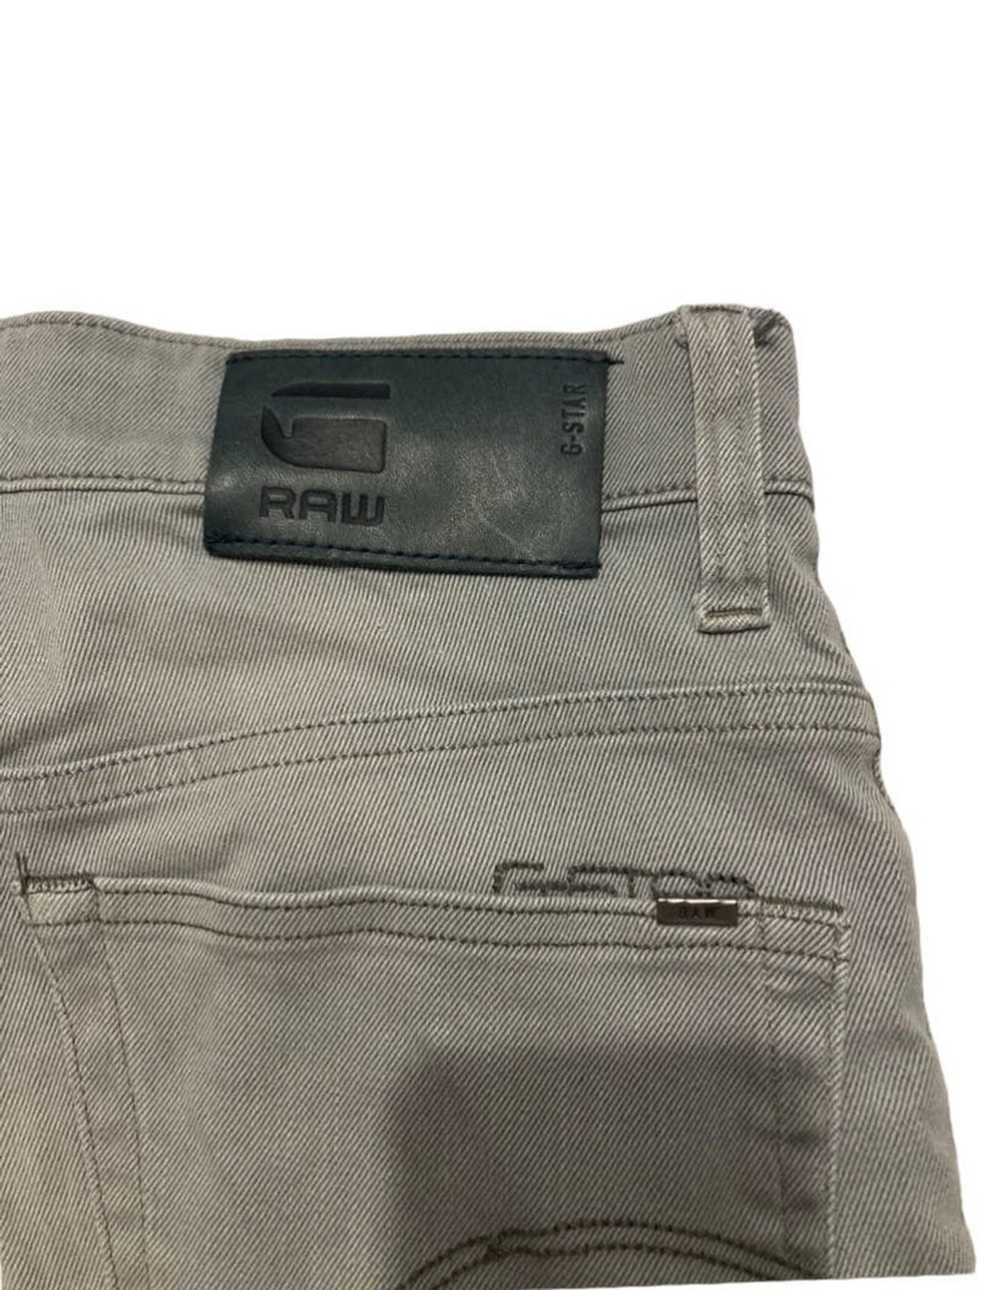 G Star Raw Authentic G-STAR RAW Jeans - image 3